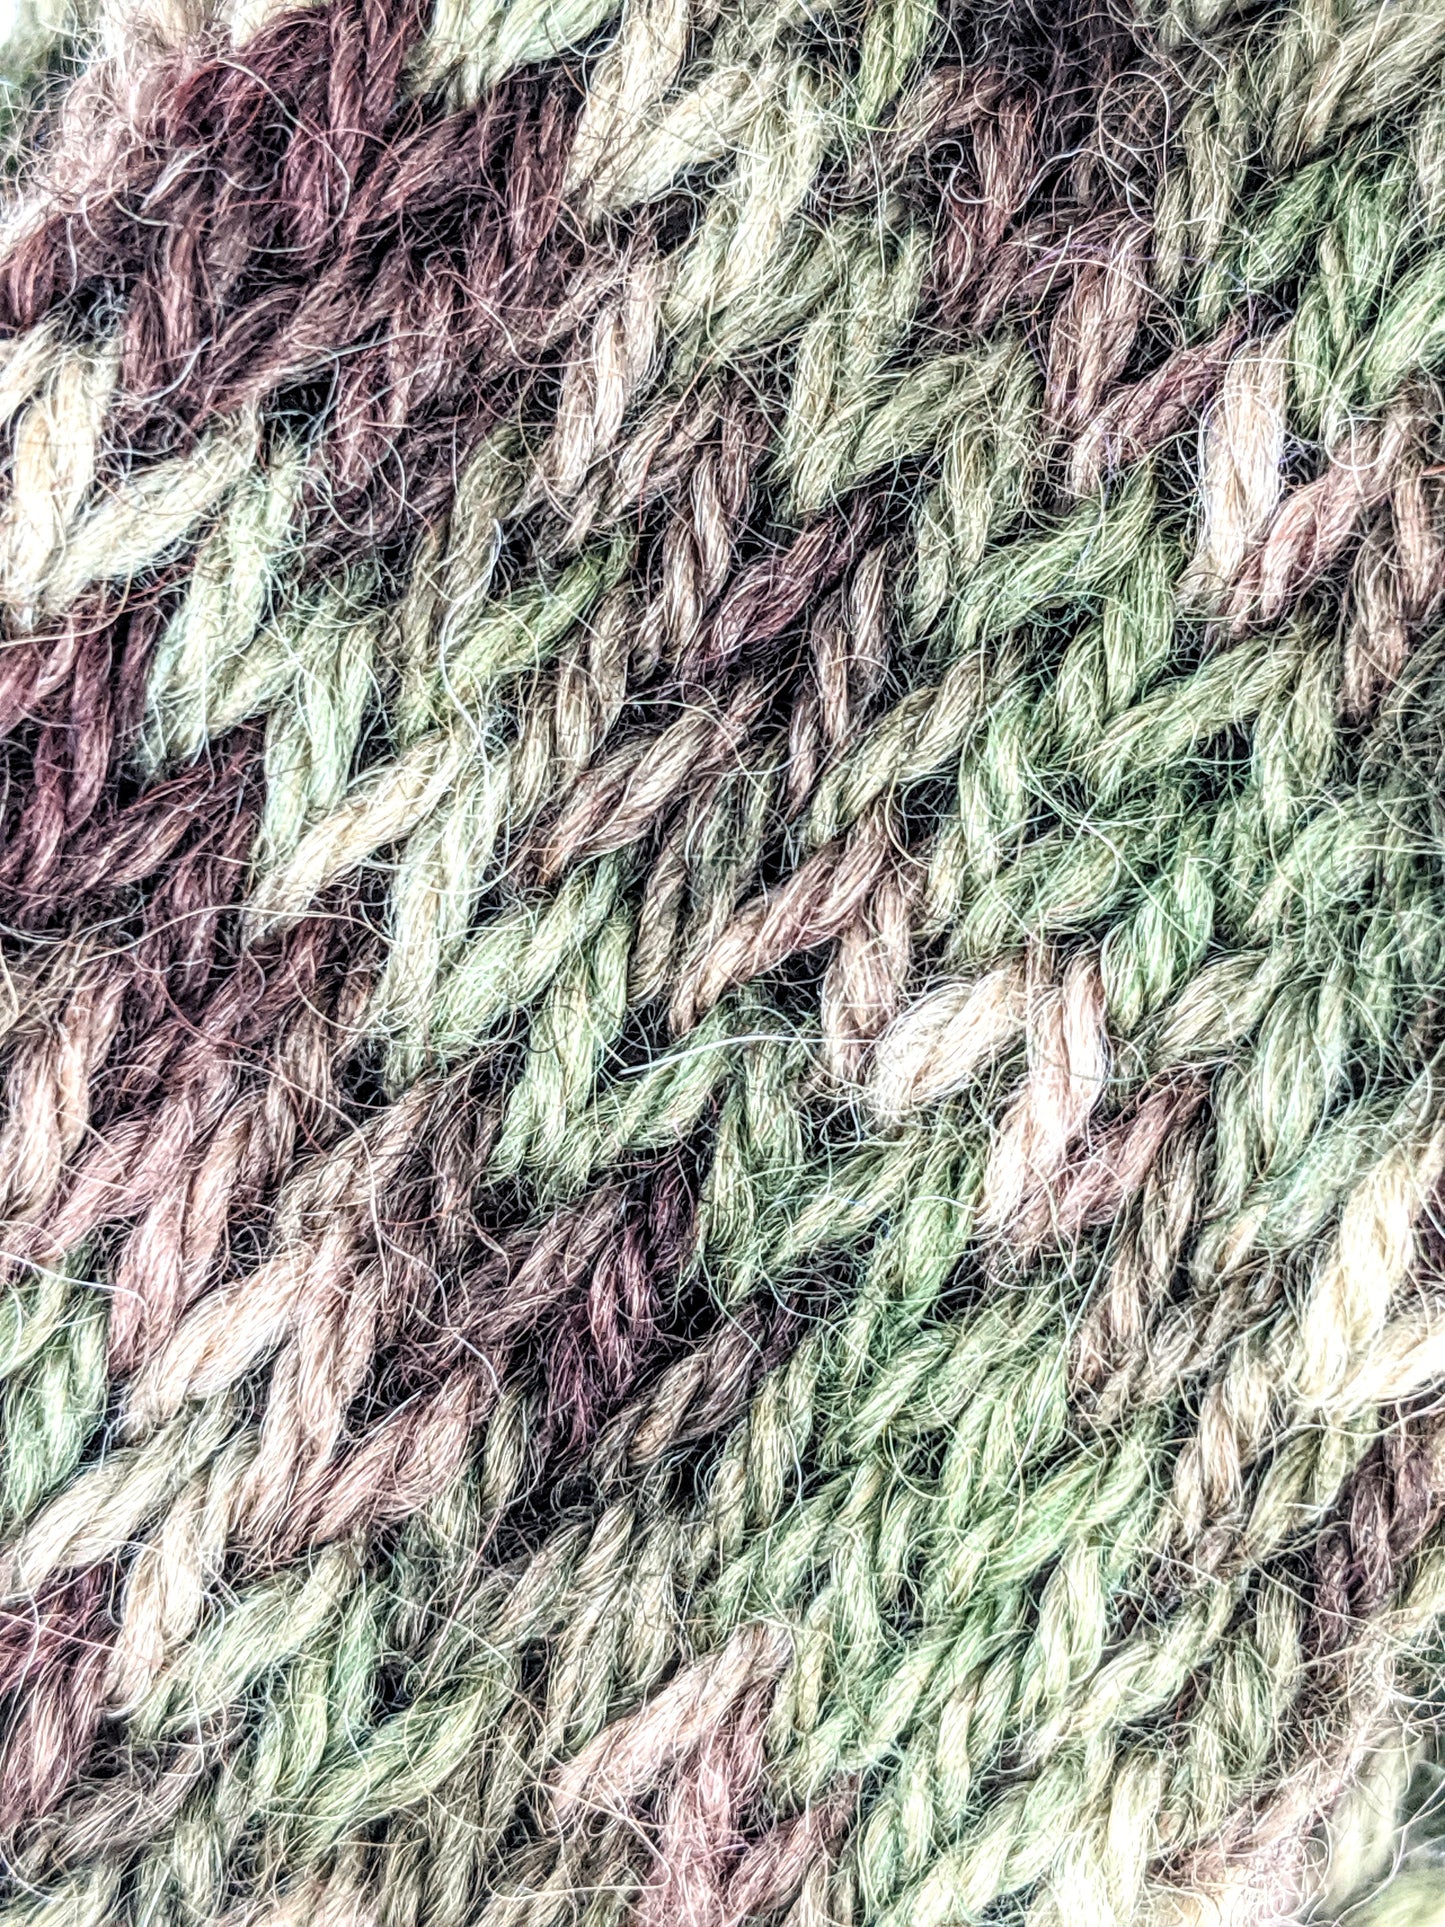 DK Knitter's Yarn green and brown